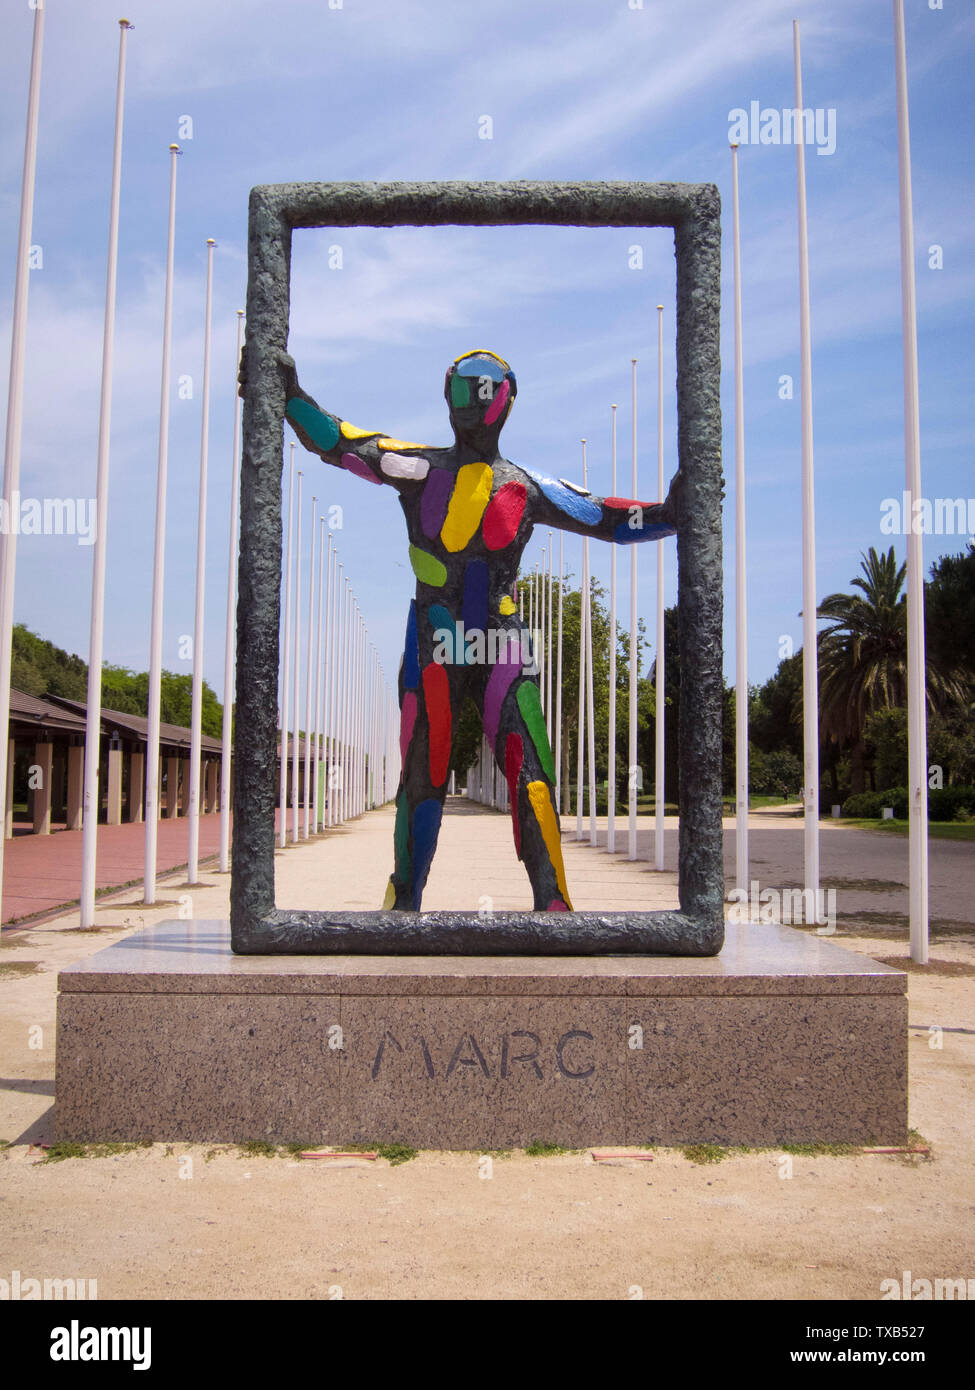 Marc sculpture, in the former Olympic village.  Barcelona, Spain. Stock Photo